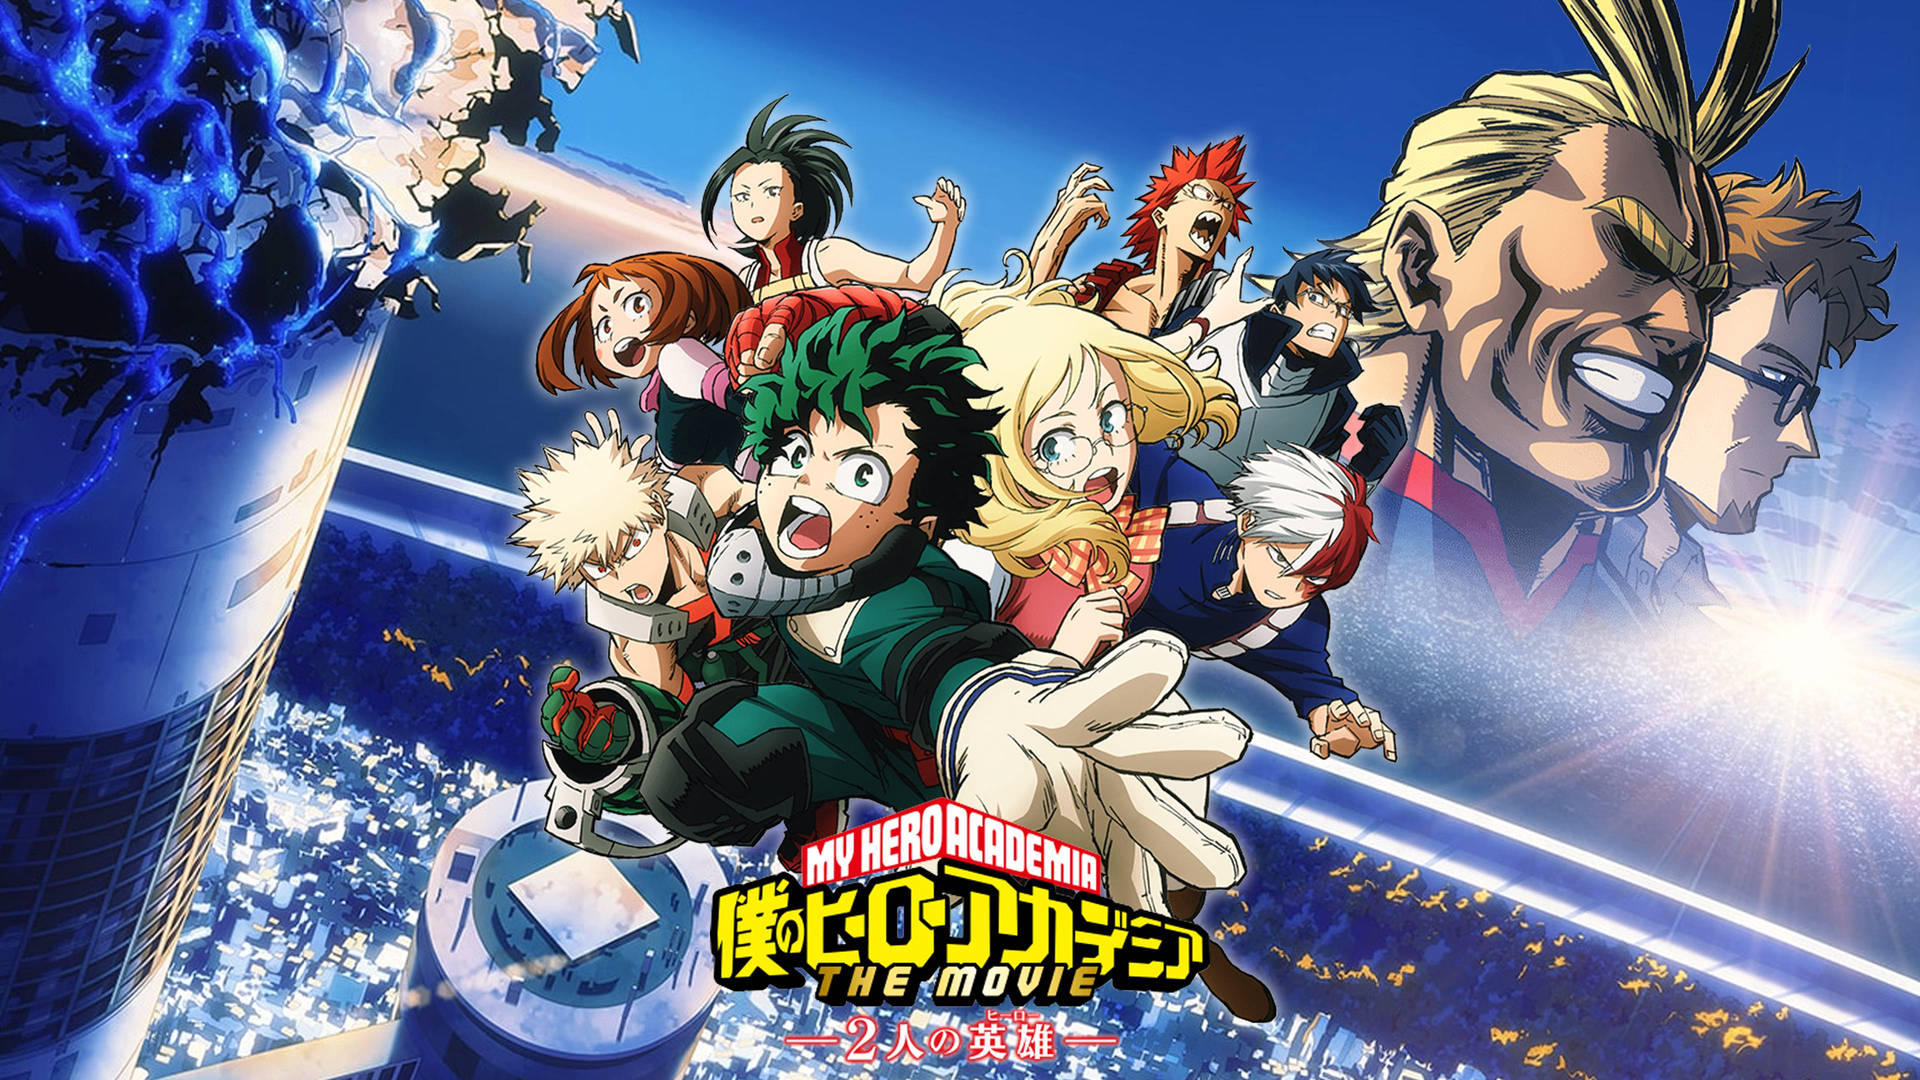 Bnha Two Heroes The Movie Background